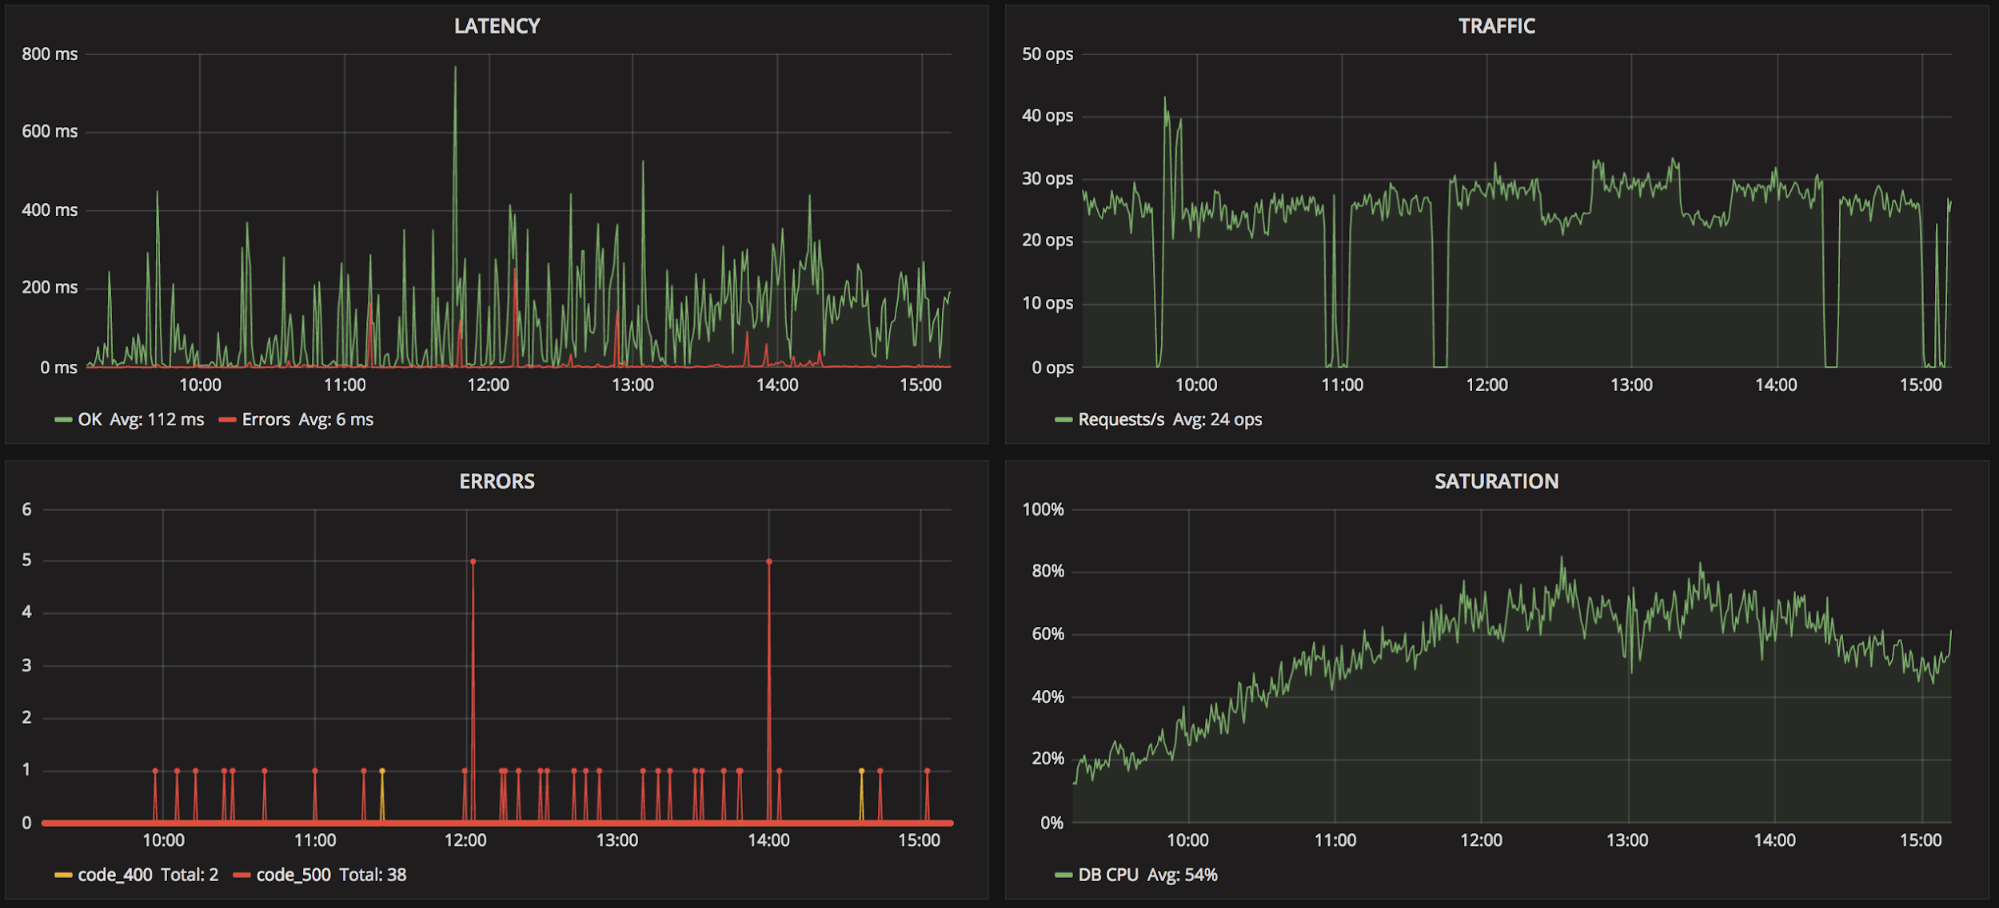 A Grafana dashboard displays time series data on latency, traffic, errors, and saturation.